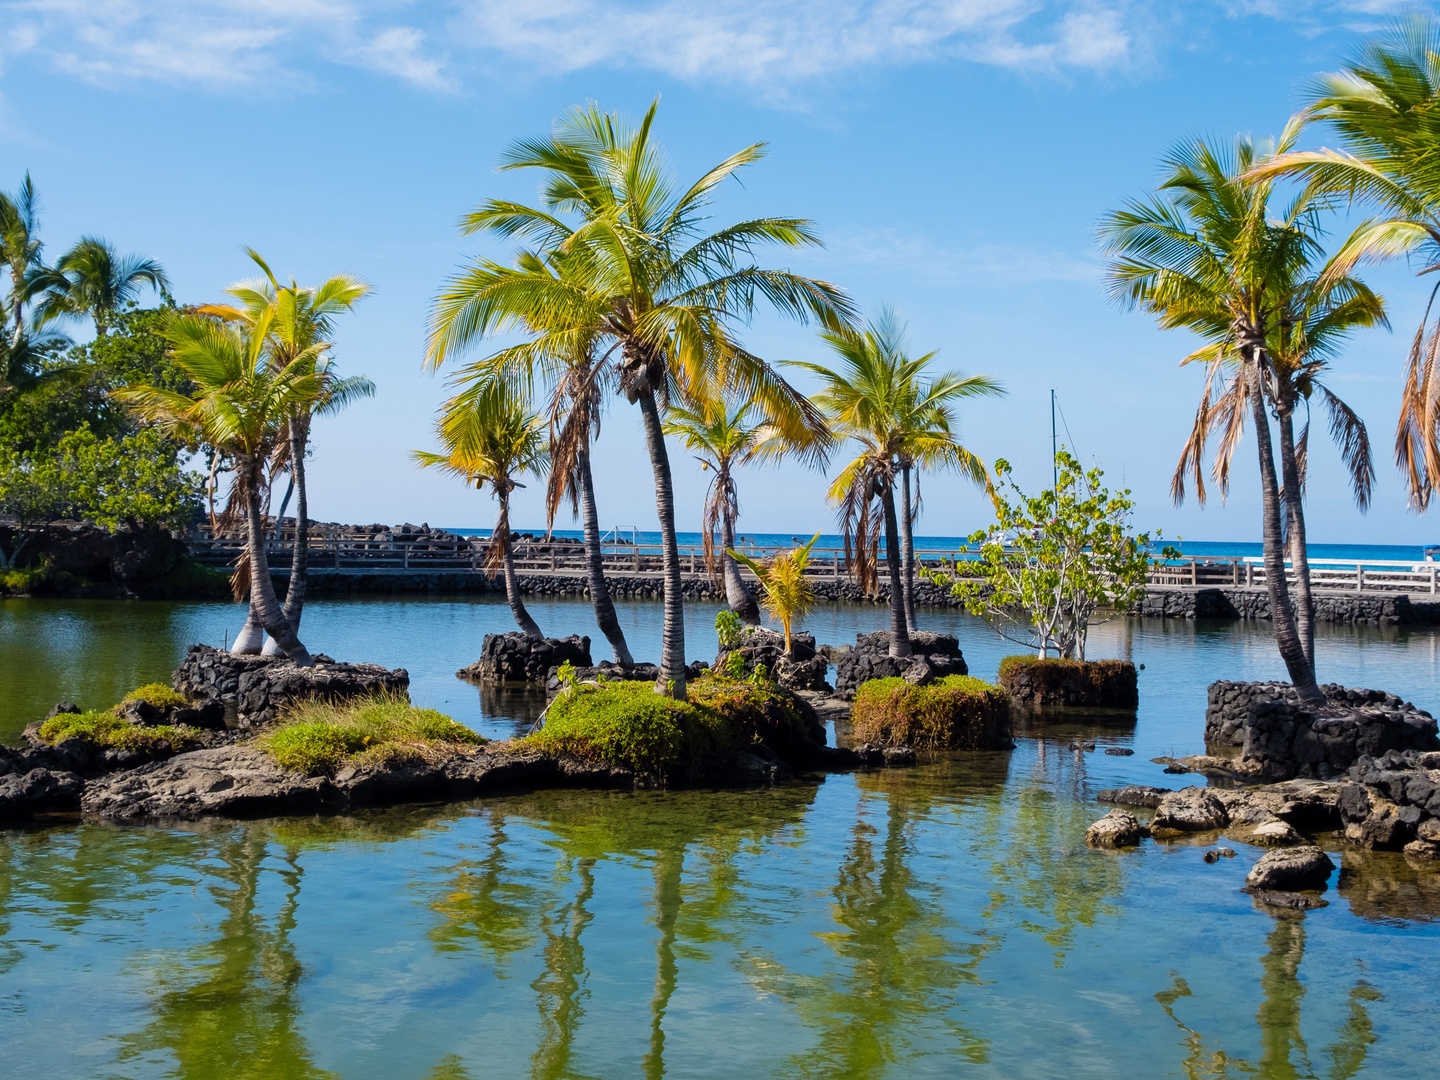 Kamuela Vacation Rentals, Mauna Lani Fairways #204 - Relax and let the rhythm of the swaying trees by the water transport you to a tranquil state of mind.